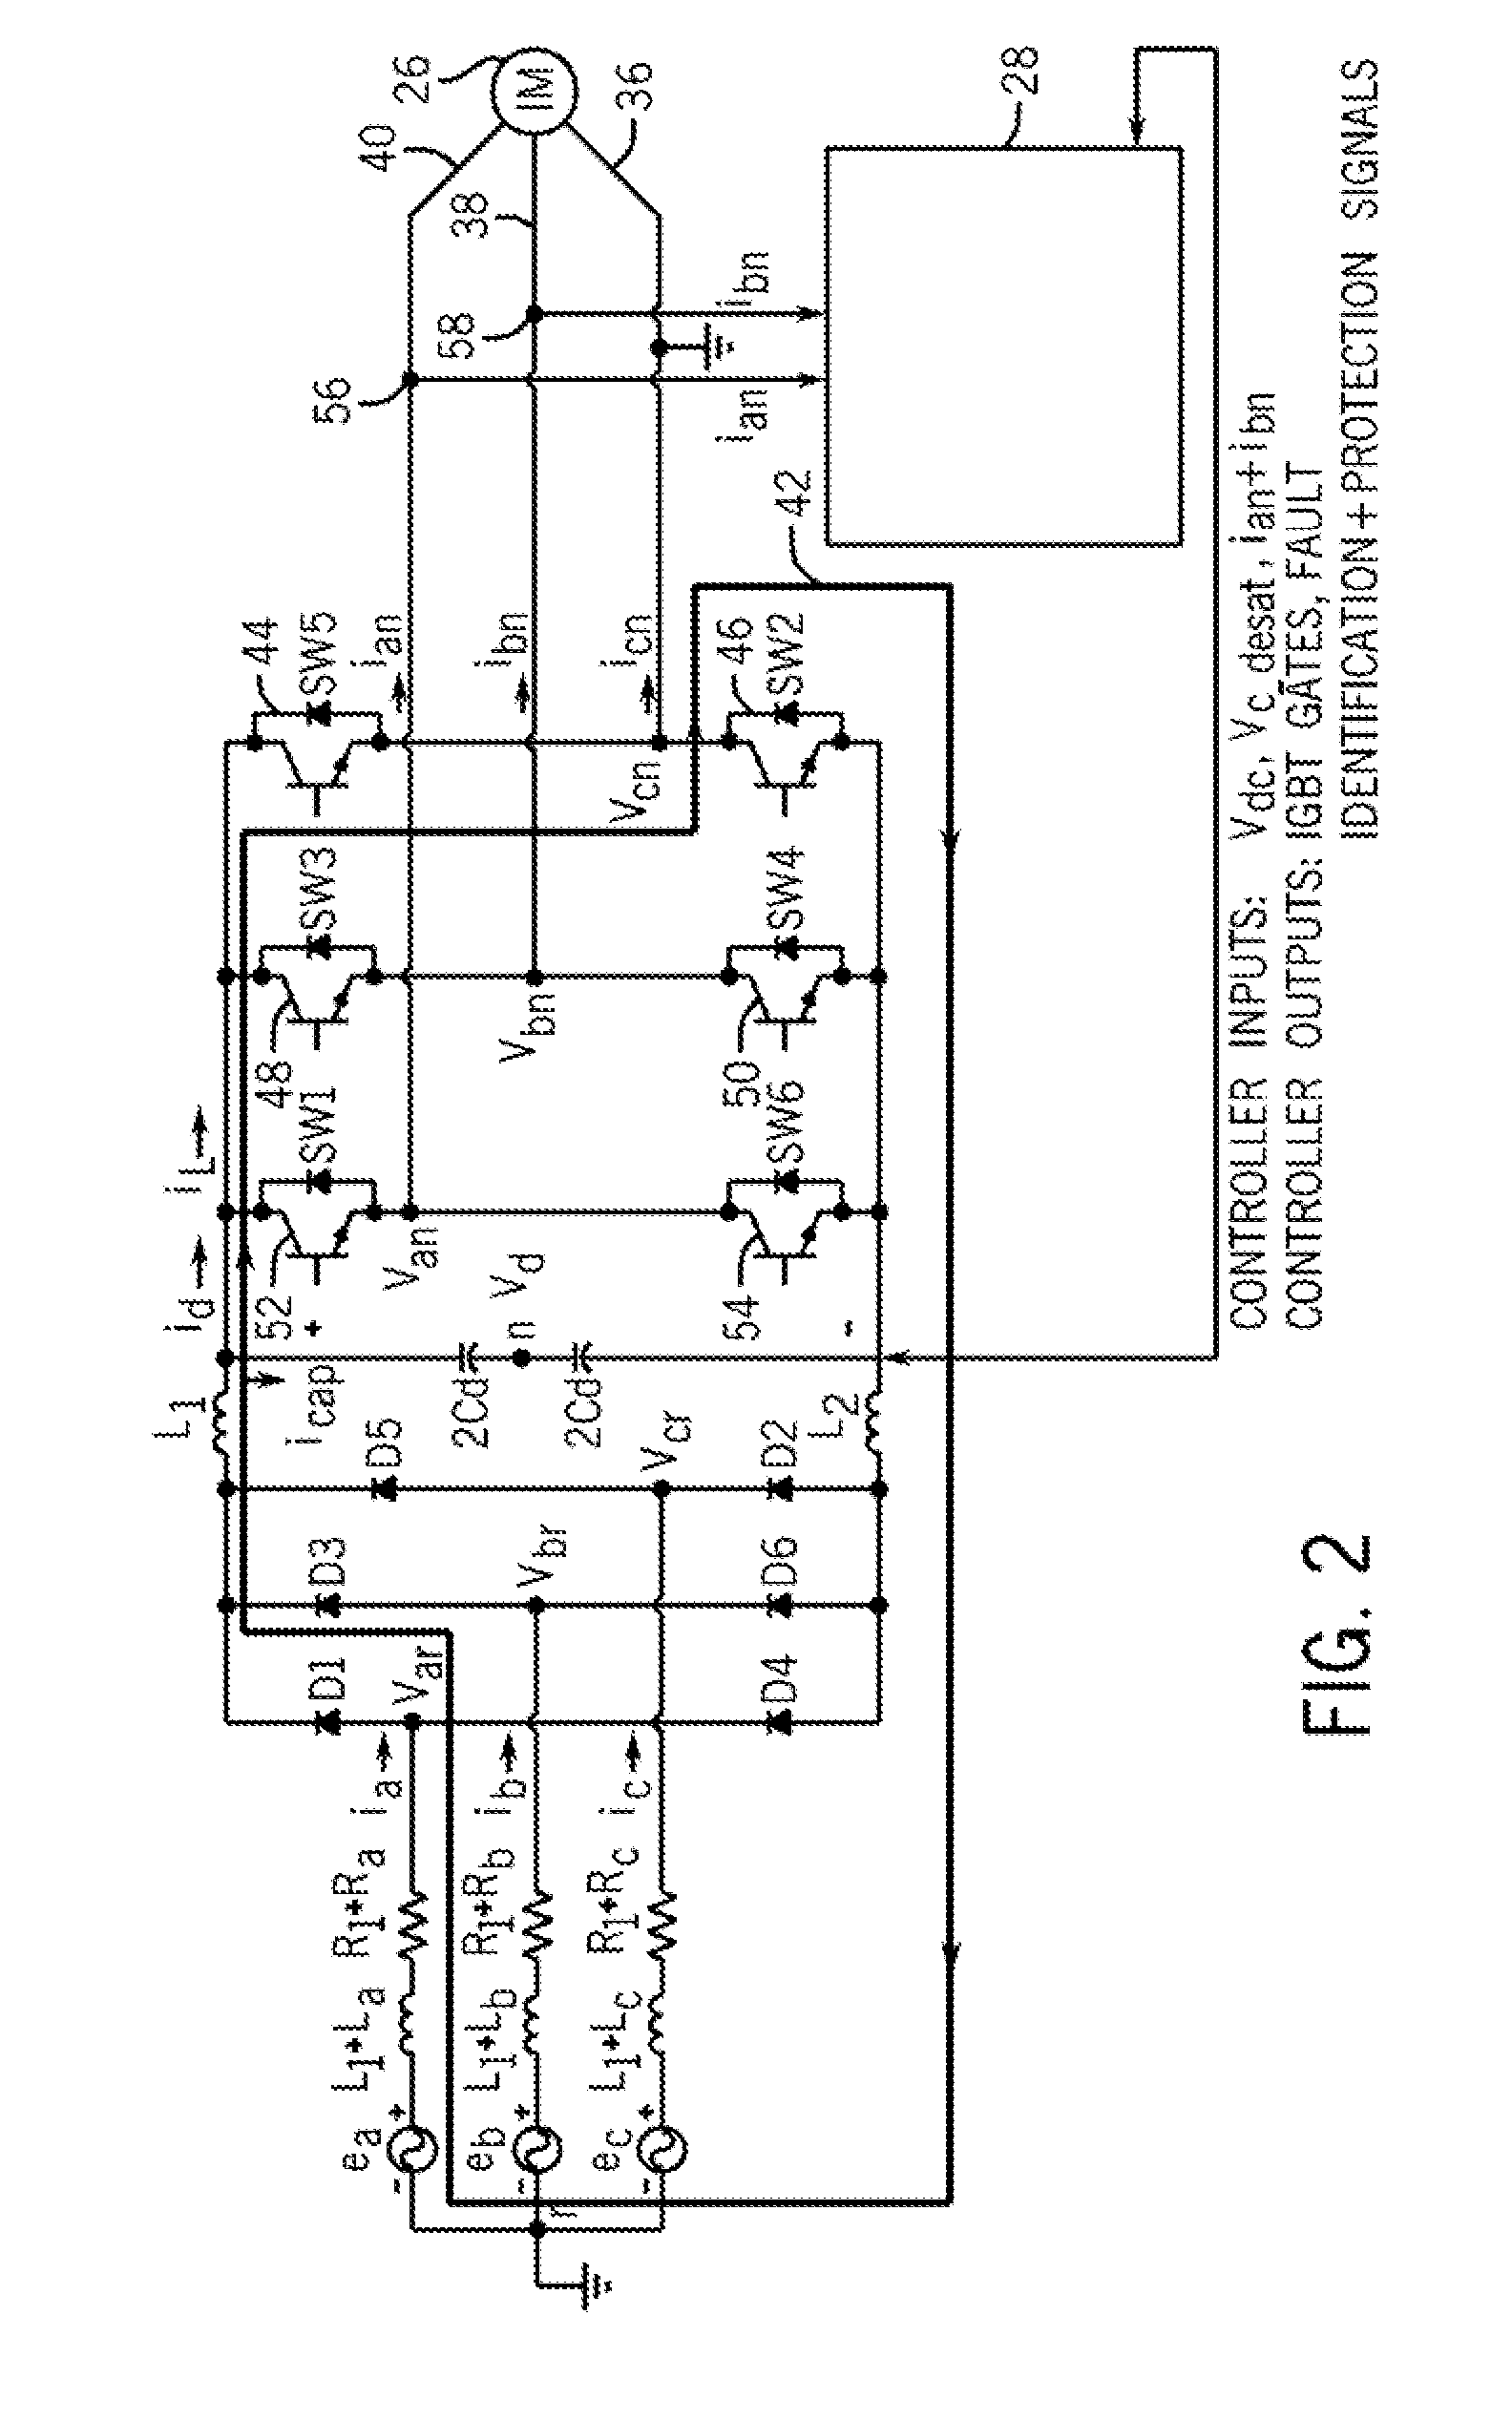 System and method for ground fault detection and protection in adjustable speed drives